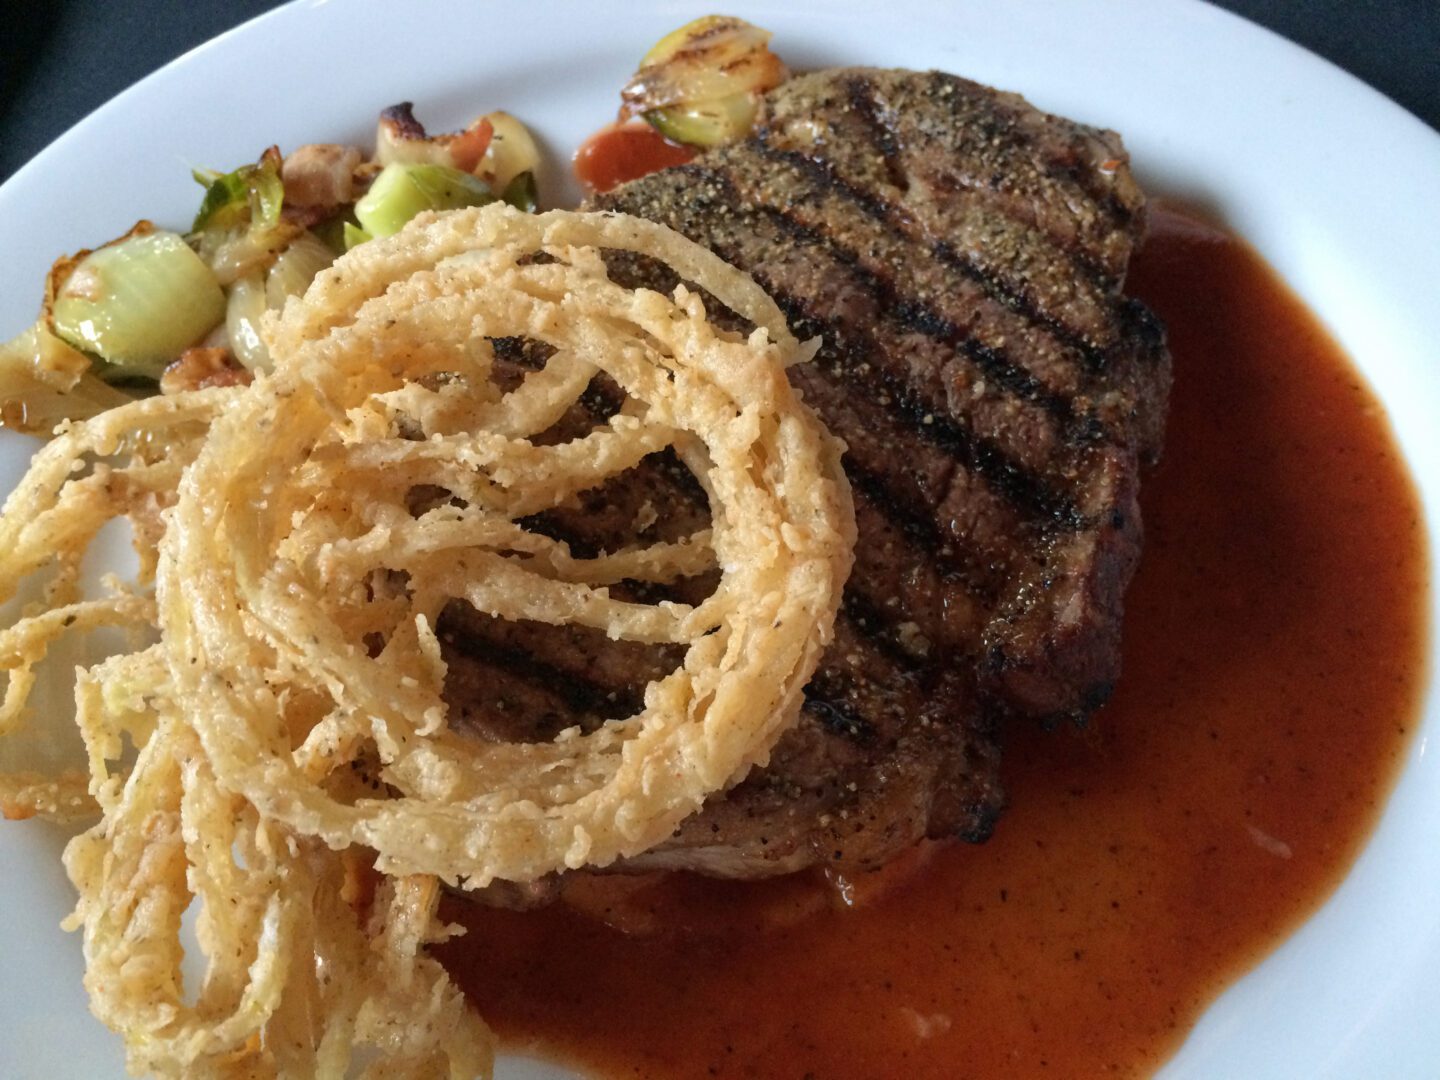 A steak with onion rings and sauce on a plate.